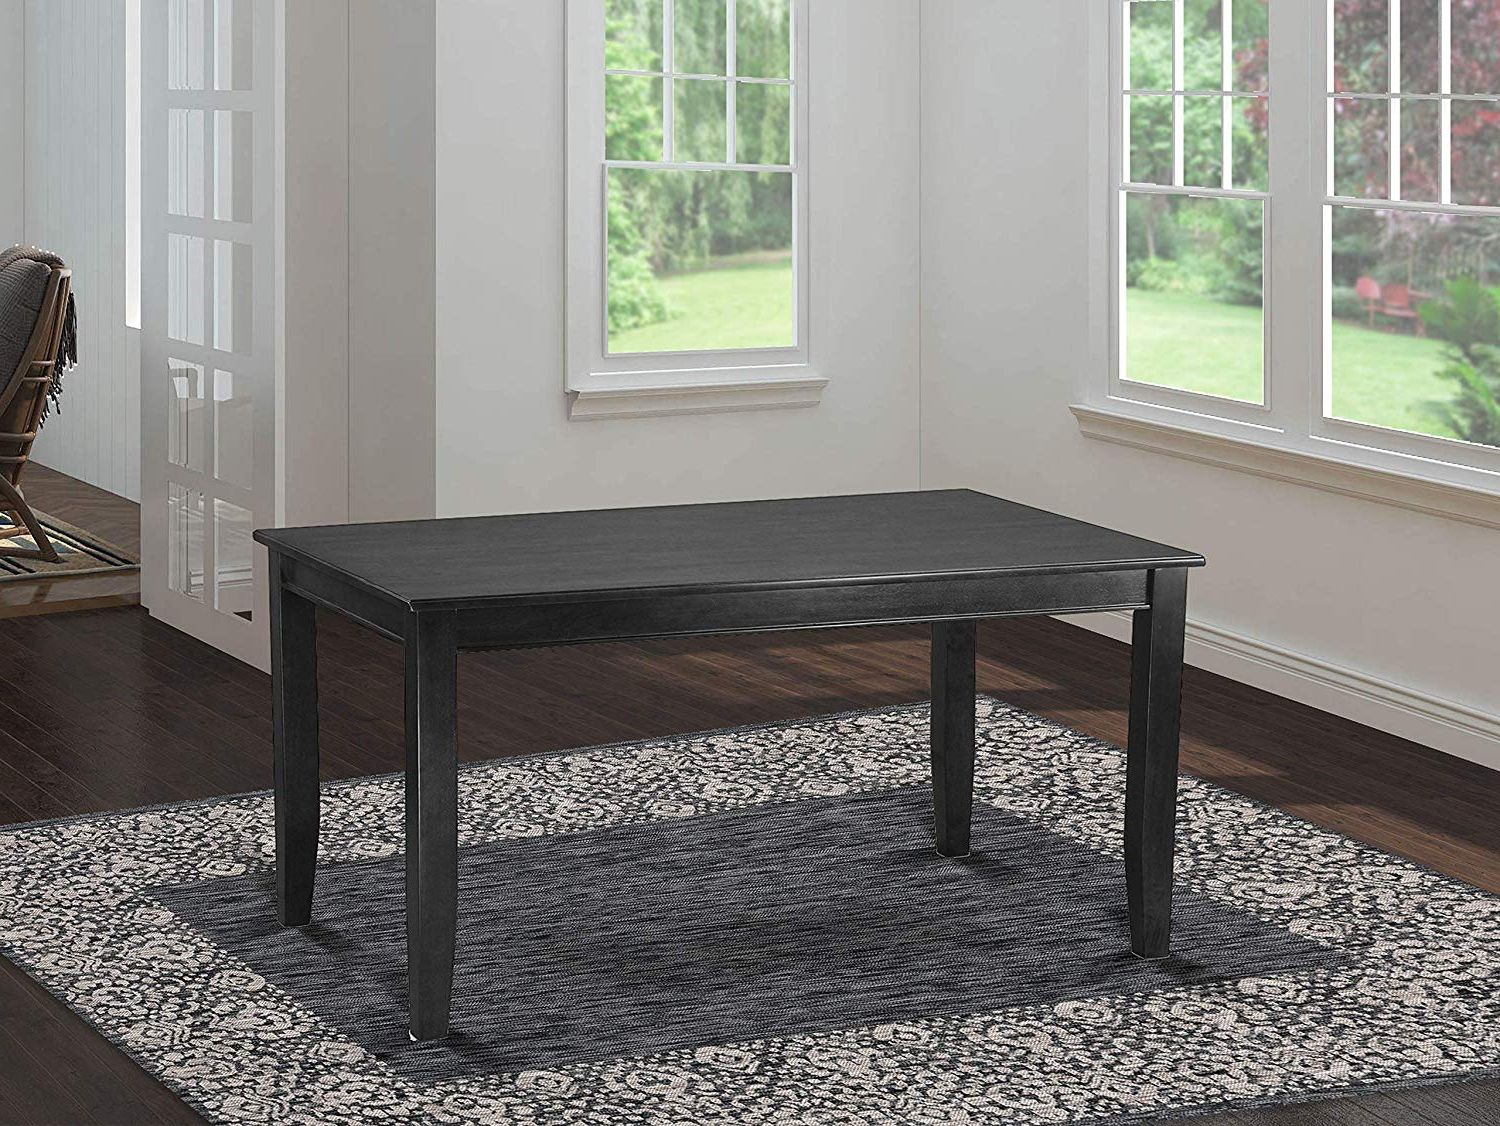 Avery Rectangular Dining Tables Pertaining To Most Recently Released Dudley Rectangular Dining Table 36"x60" In Black Finish (View 20 of 25)